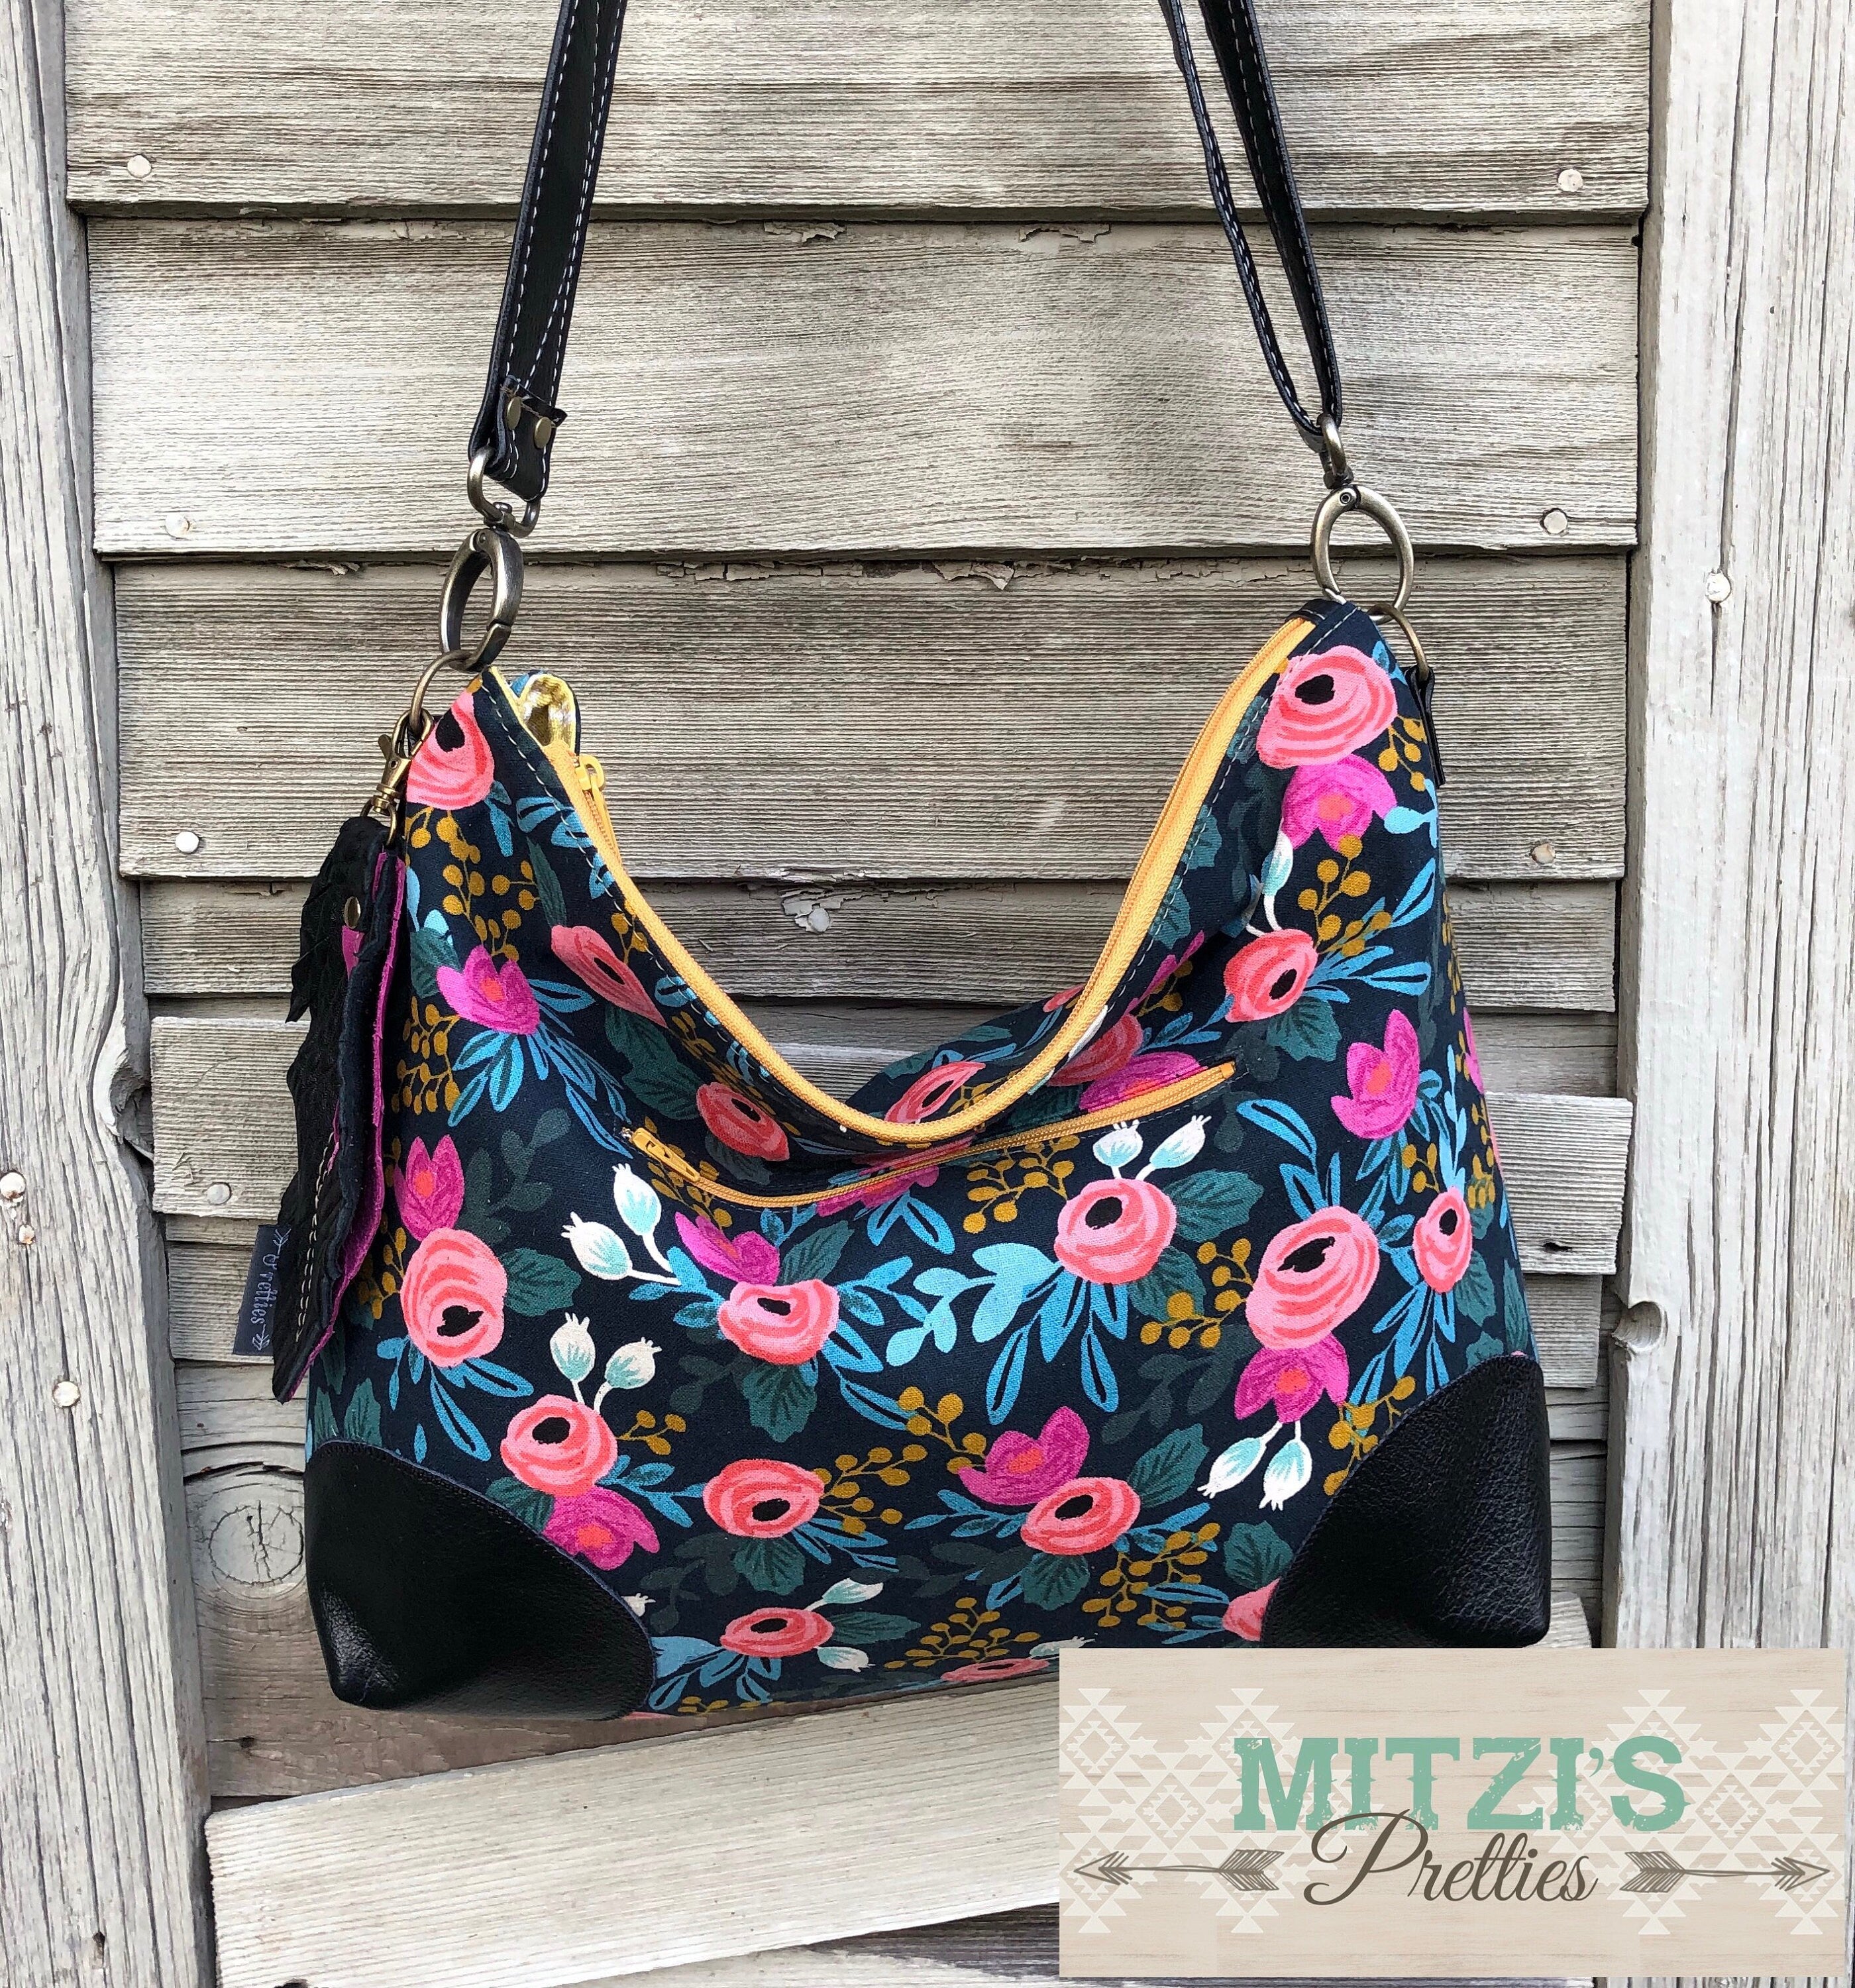 MADE TO ORDER Slouchy Floral Hobo w/ Genuine Leather, Feather & Crossbody Strap